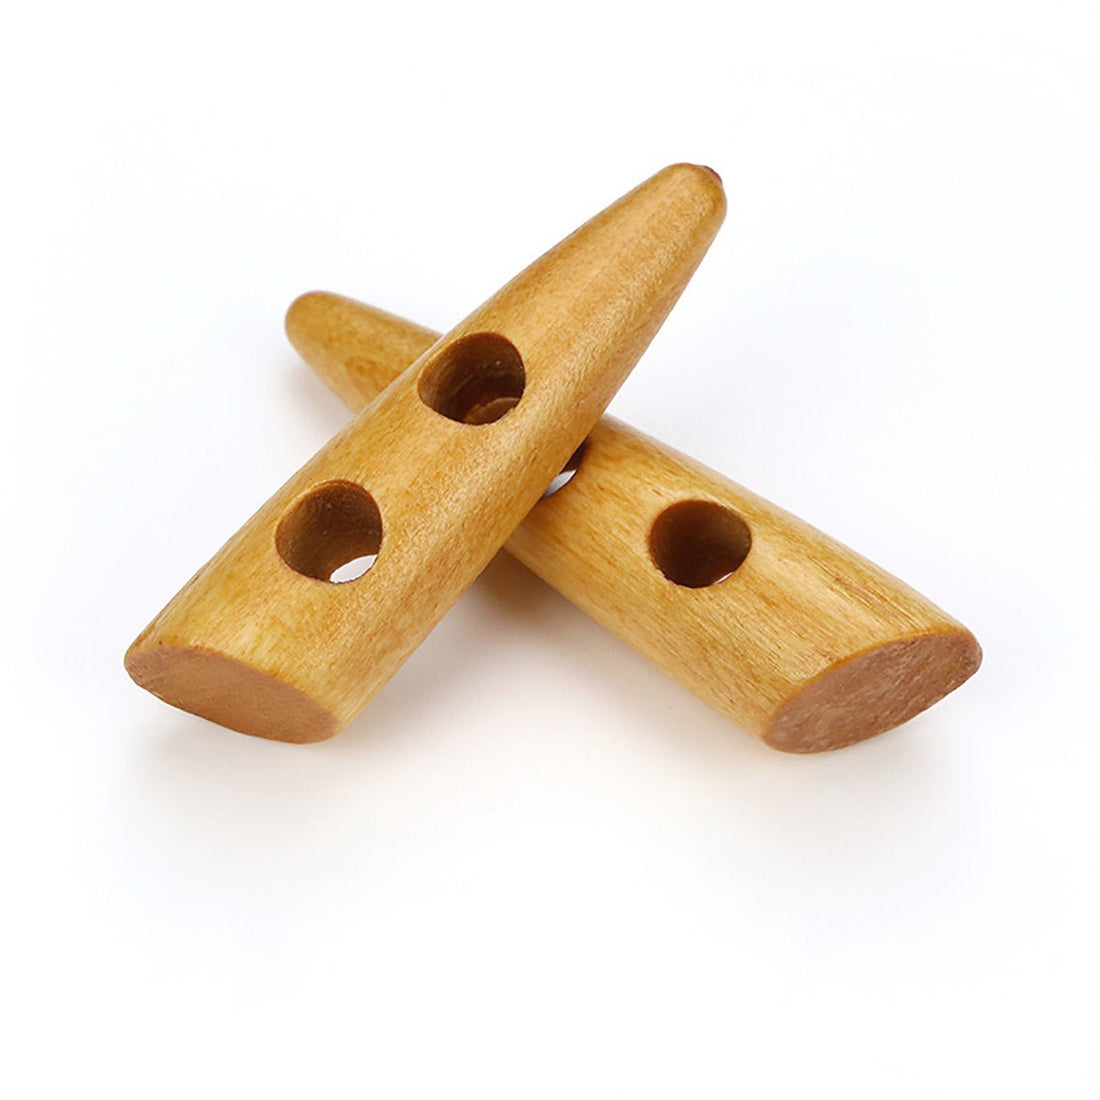 3 wooden Toggle Buttons - Golden Brown - 5cm